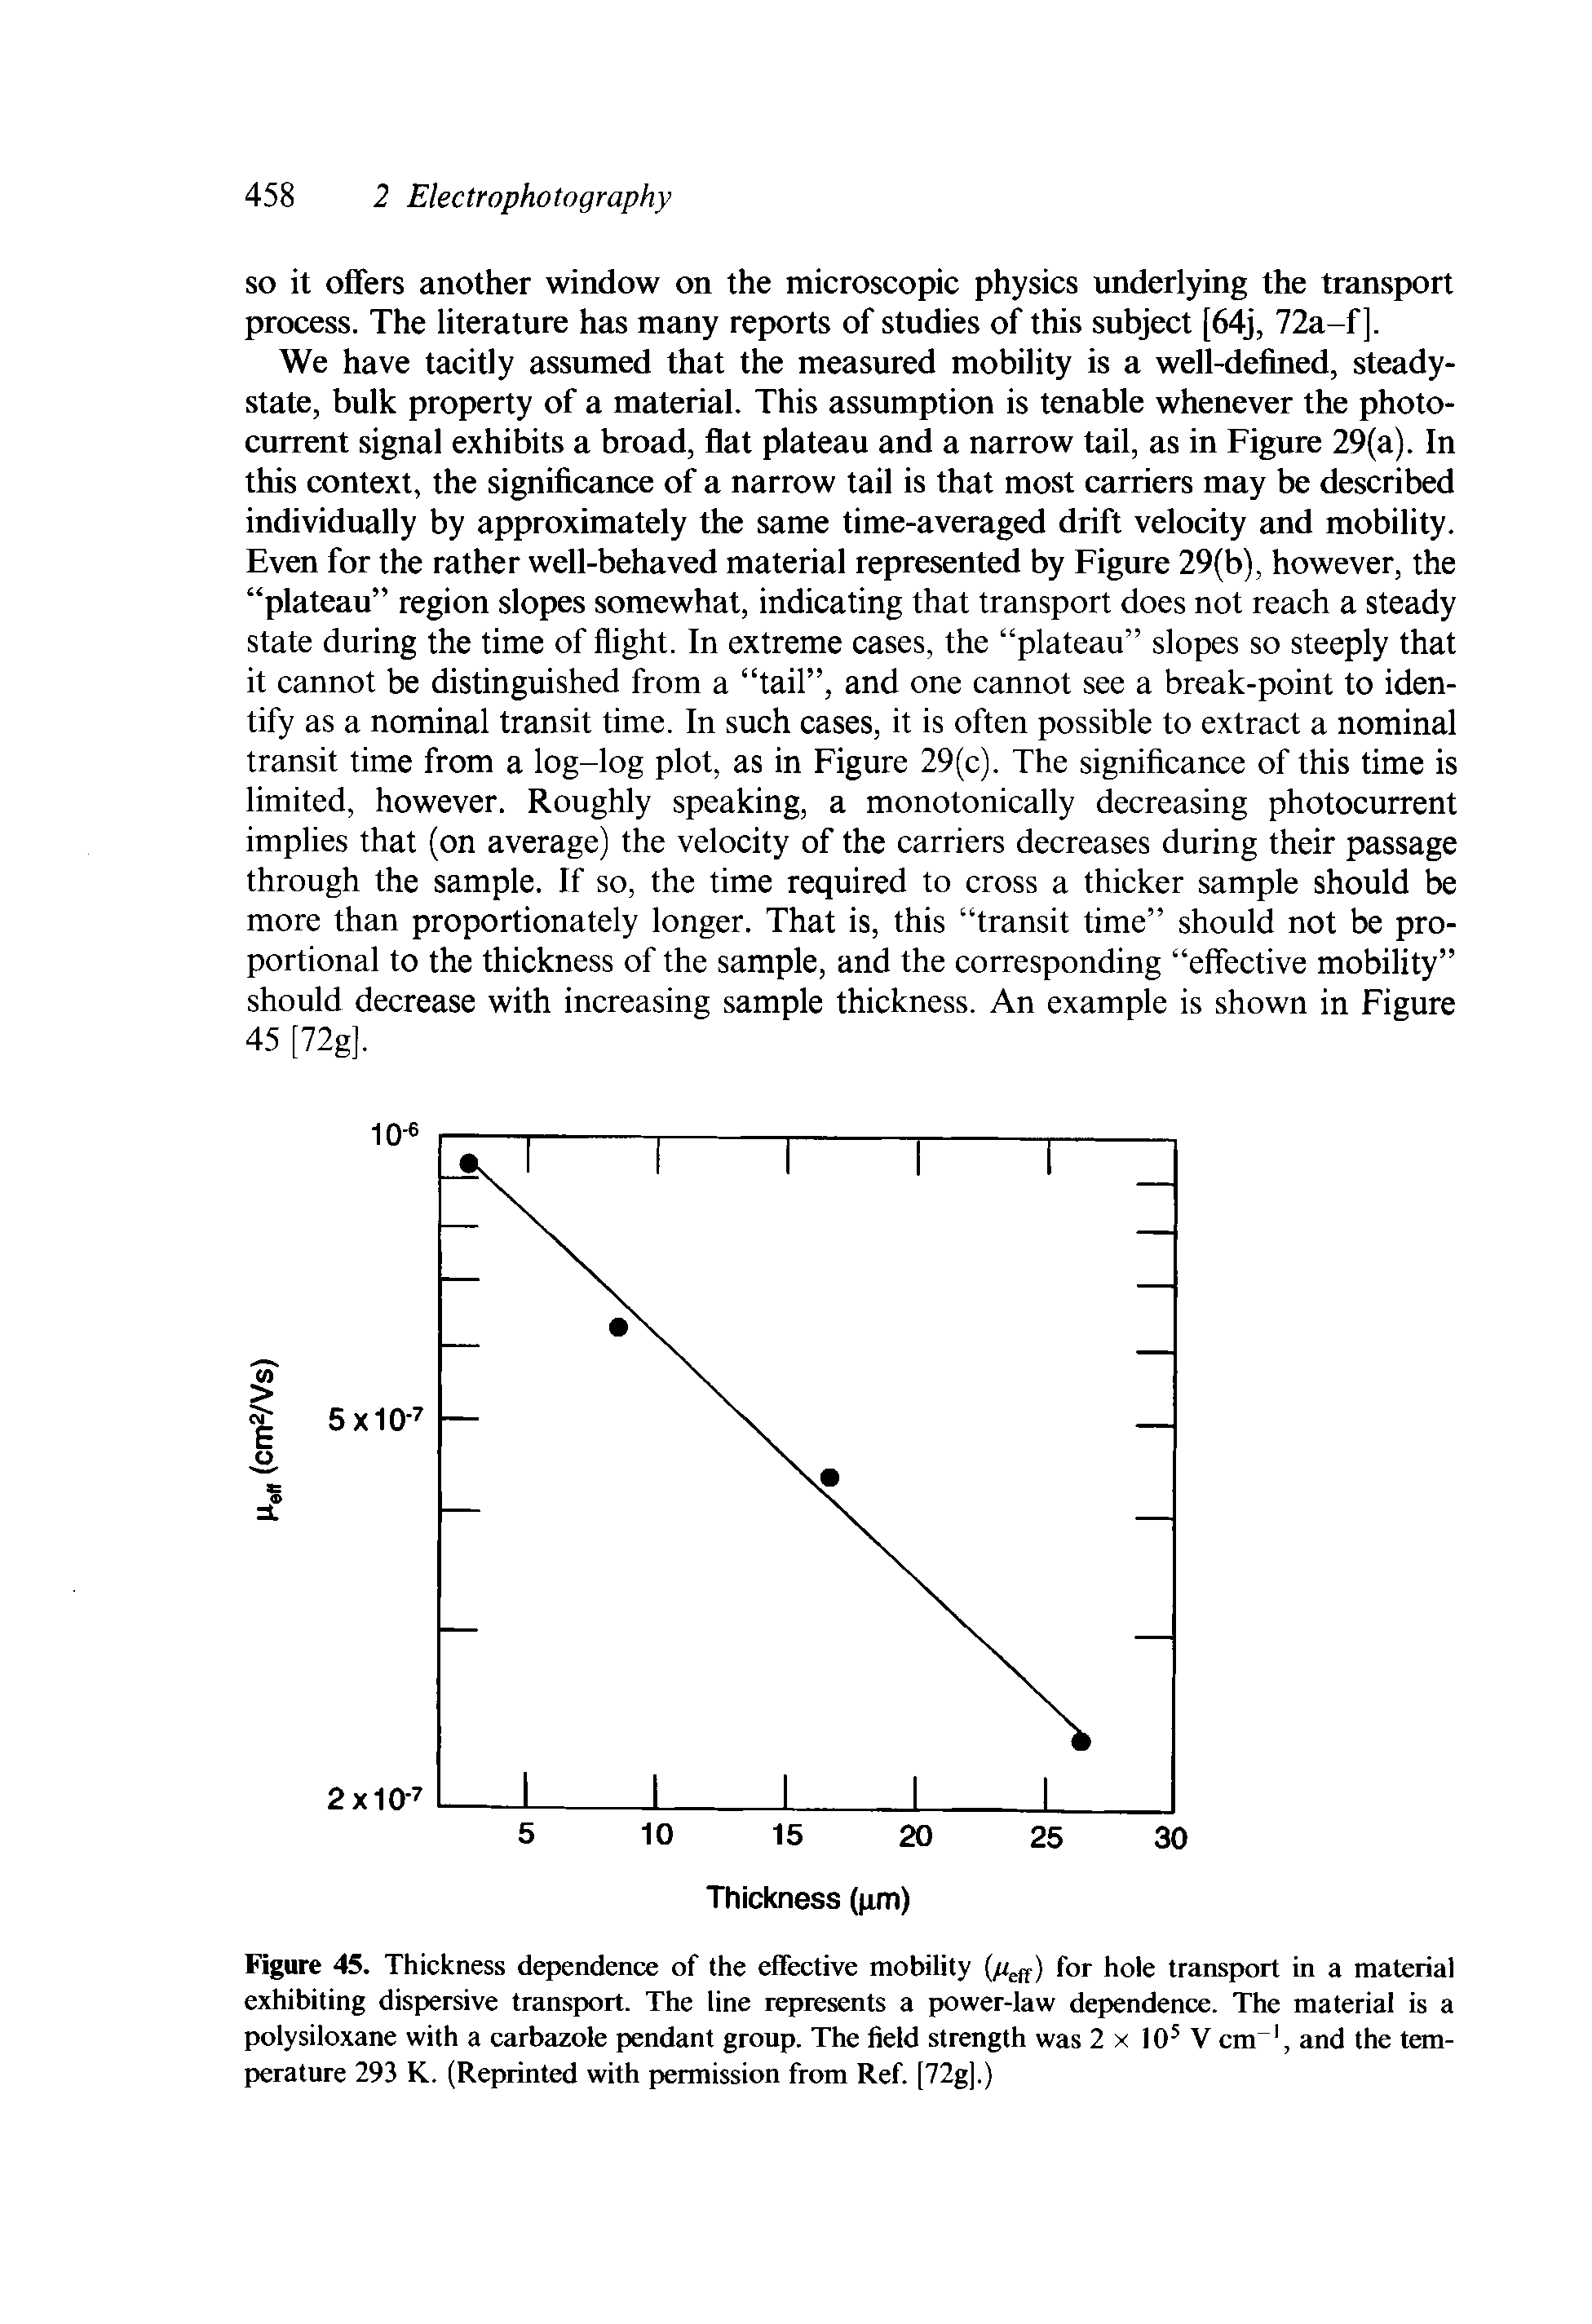 Figure 45. Thickness dependence of the effective mobility for hole transport in a material exhibiting dispersive transport. The line represents a power-law dependence. The material is a polysiloxane with a carbazole pendant group. The field strength was 2 x 10 V cm and the temperature 293 K. (Reprinted with permission from Ref. [72g].)...